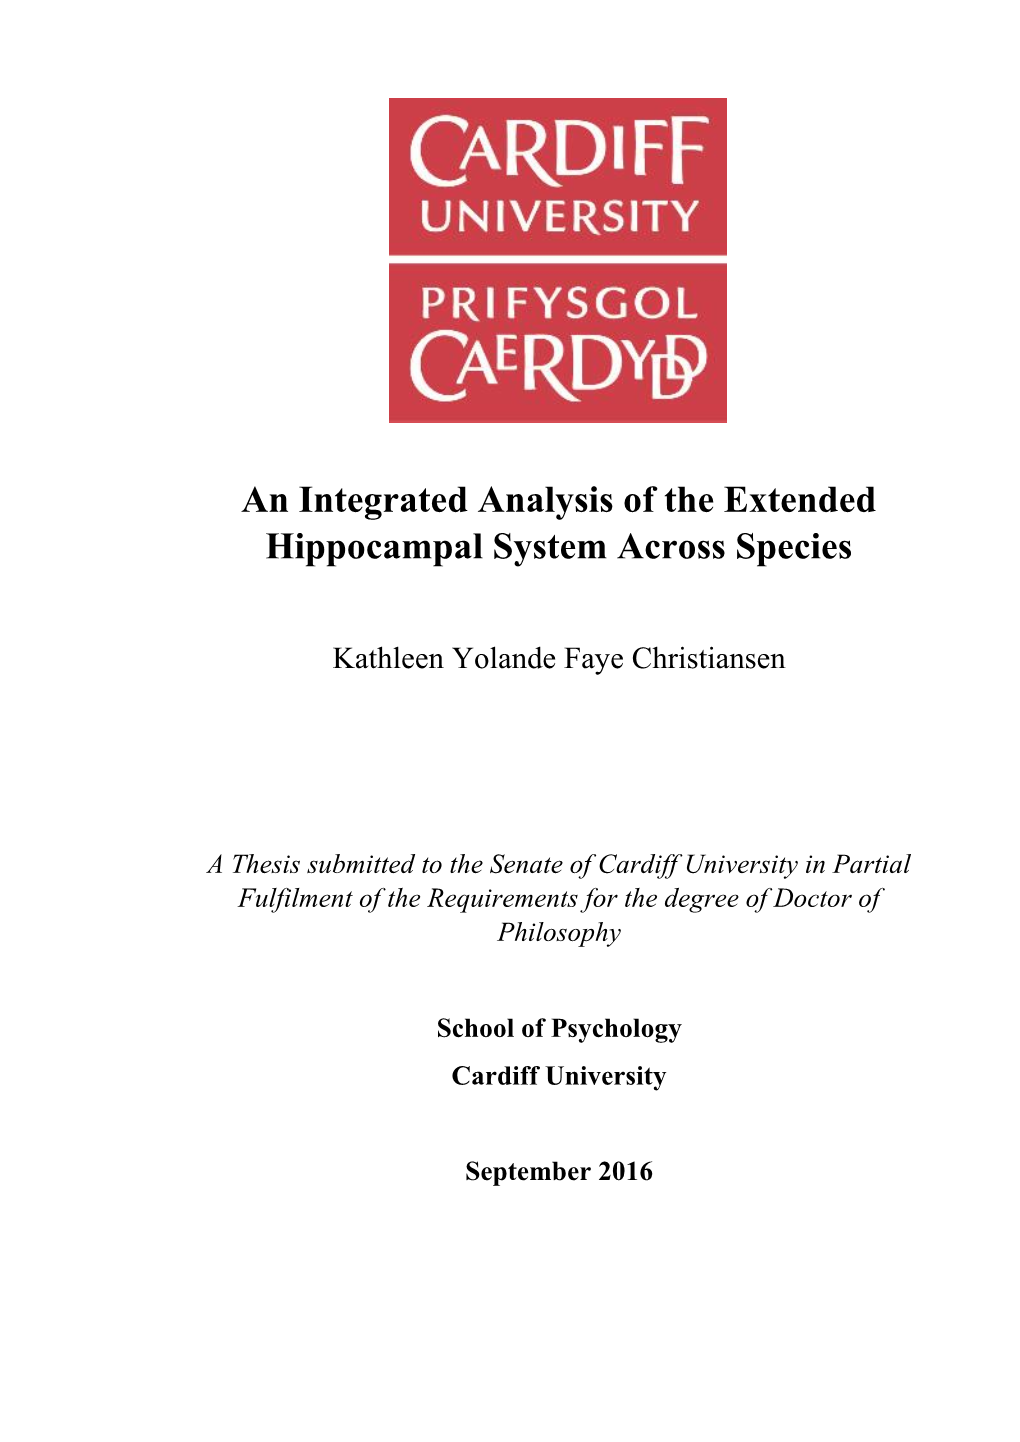 An Integrated Analysis of the Extended Hippocampal System Across Species